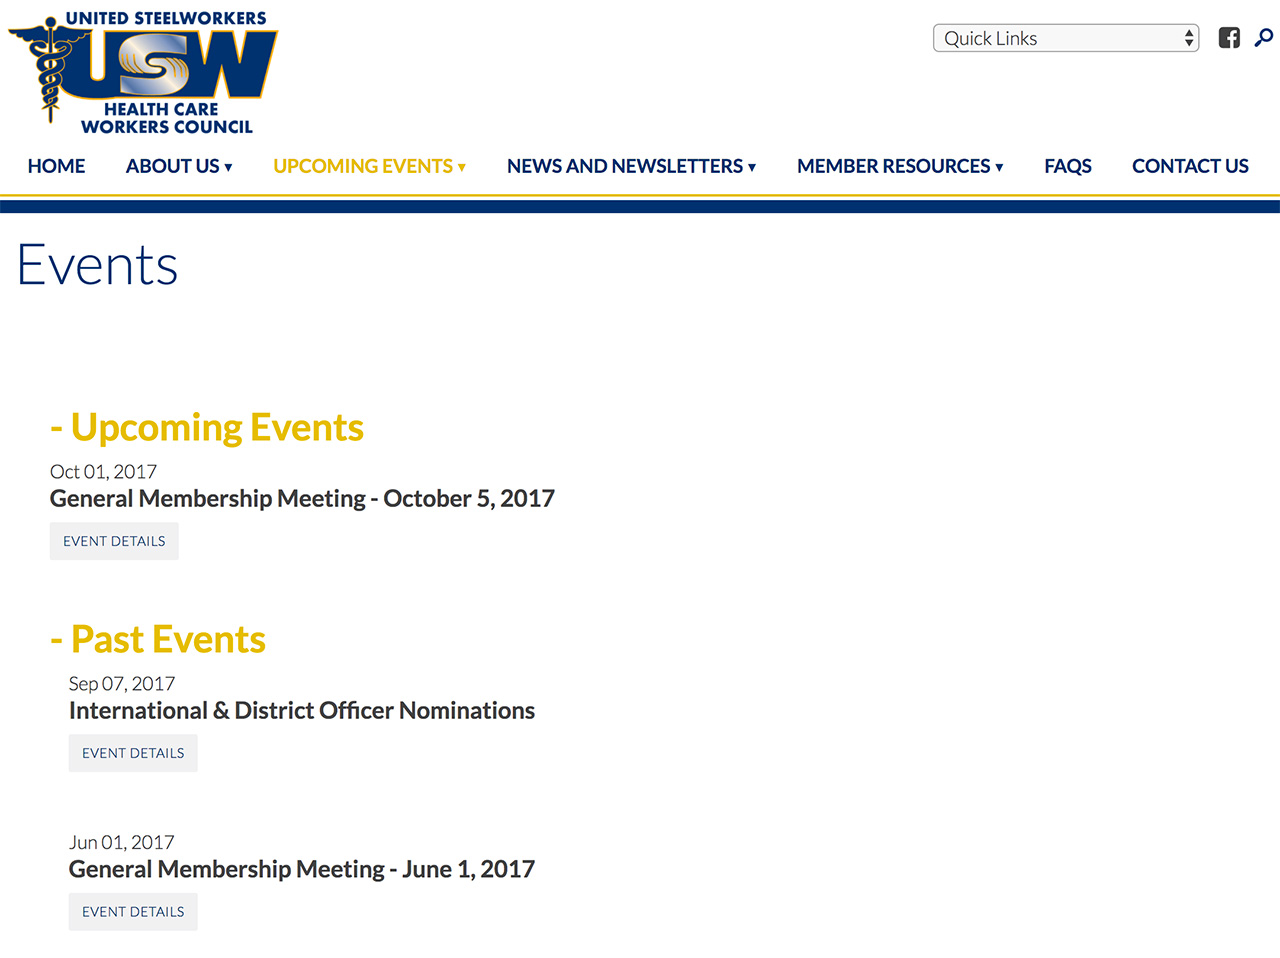 United Steelworkers Local 4-200: Automatically Sorted Past and Upcoming Events Archive